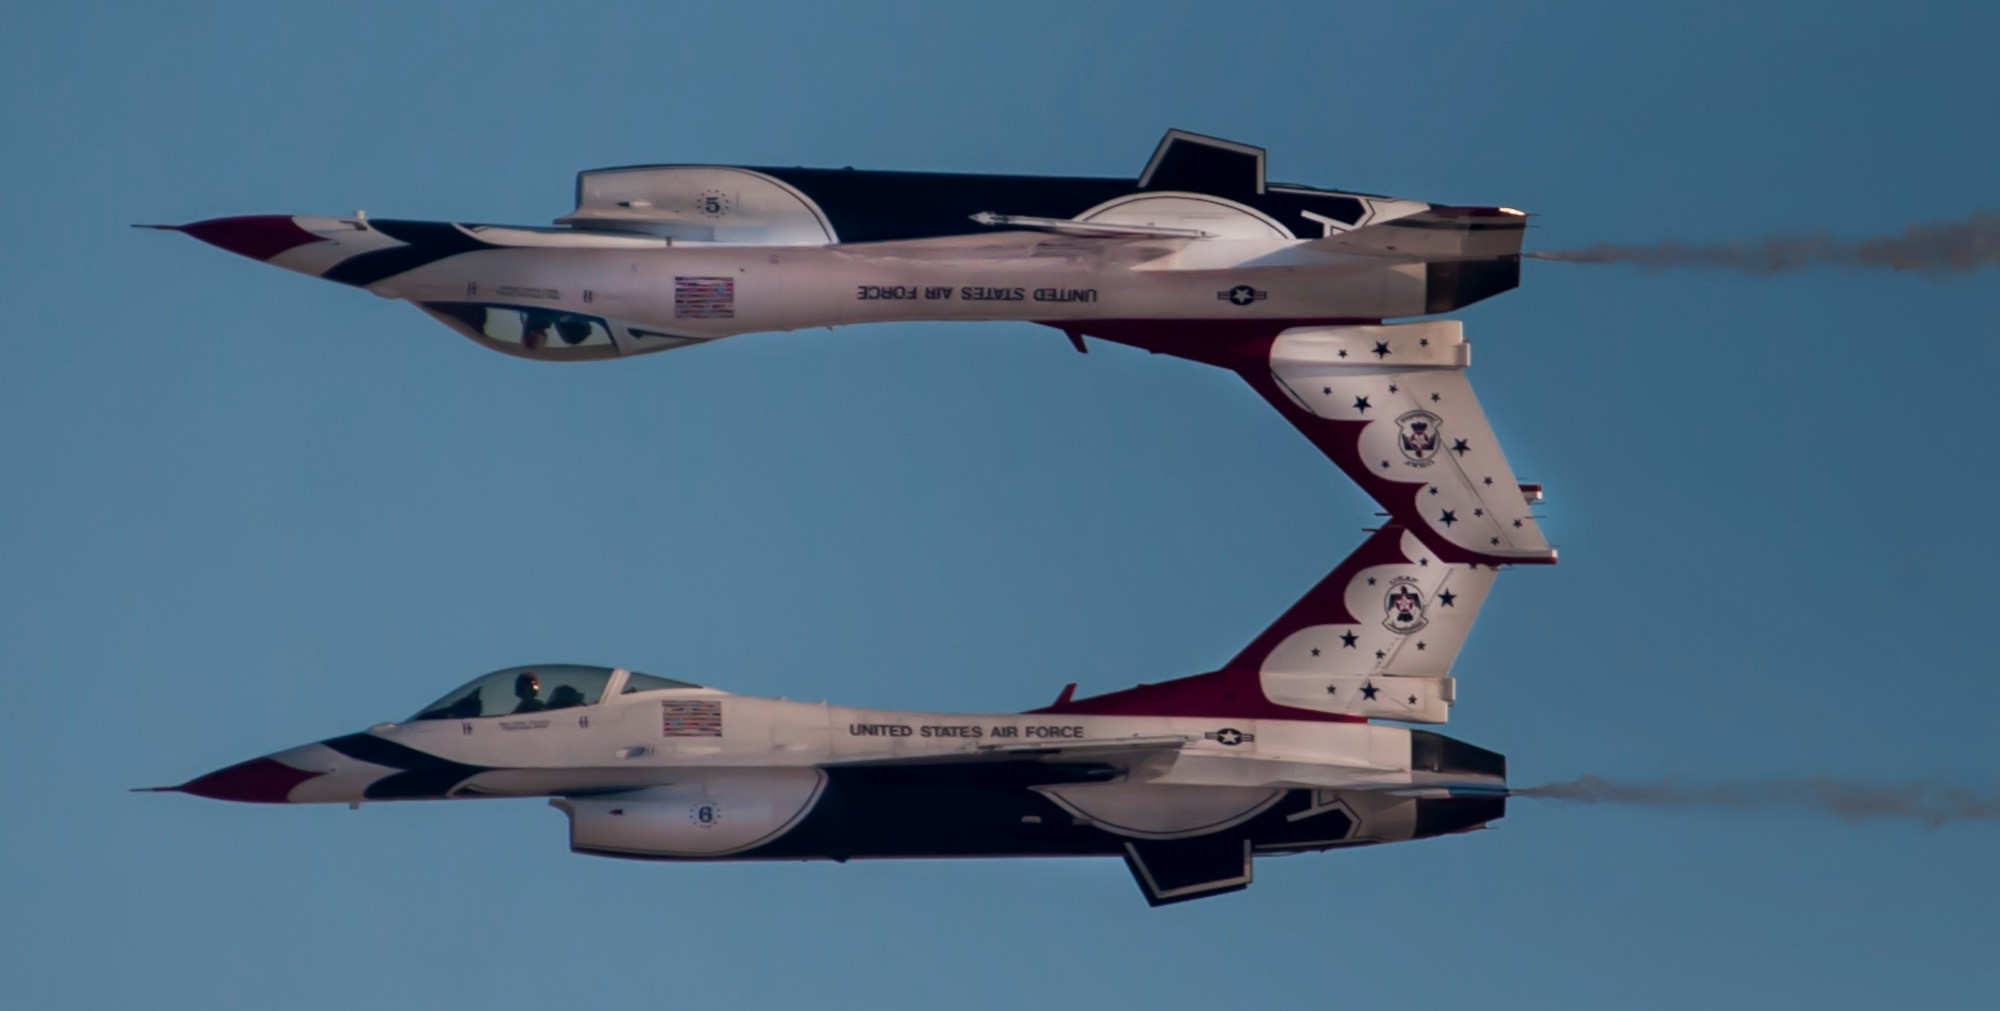 U.S. Air Force Thunderbird Air Demonstration Squadron fly in the calypso formation during Aviation Nation on Nellis Air Force Base, Nev., Nov. 11, 2016. The Thunderbirds perform precision aerial maneuvers demonstrating the capabilities of Air Force. (U.S. Air Force photo by Airman 1st Class Kevin Tanenbaum/Released)